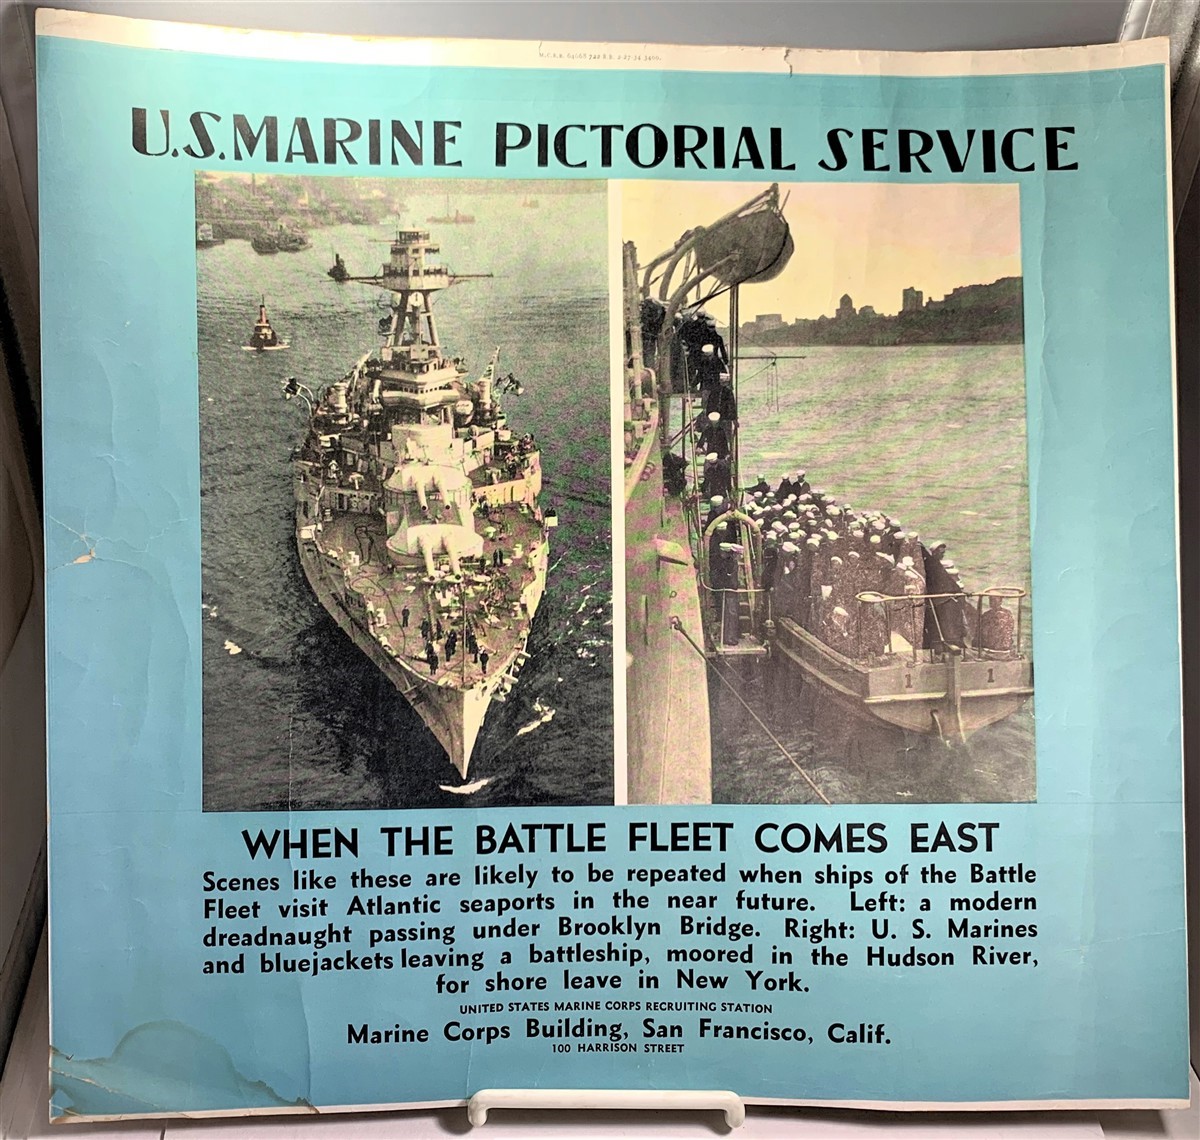 U. S. MARINES - U.S. Marine Pictorial Service: When the Battle Fleet Comes East Recruiting Poster